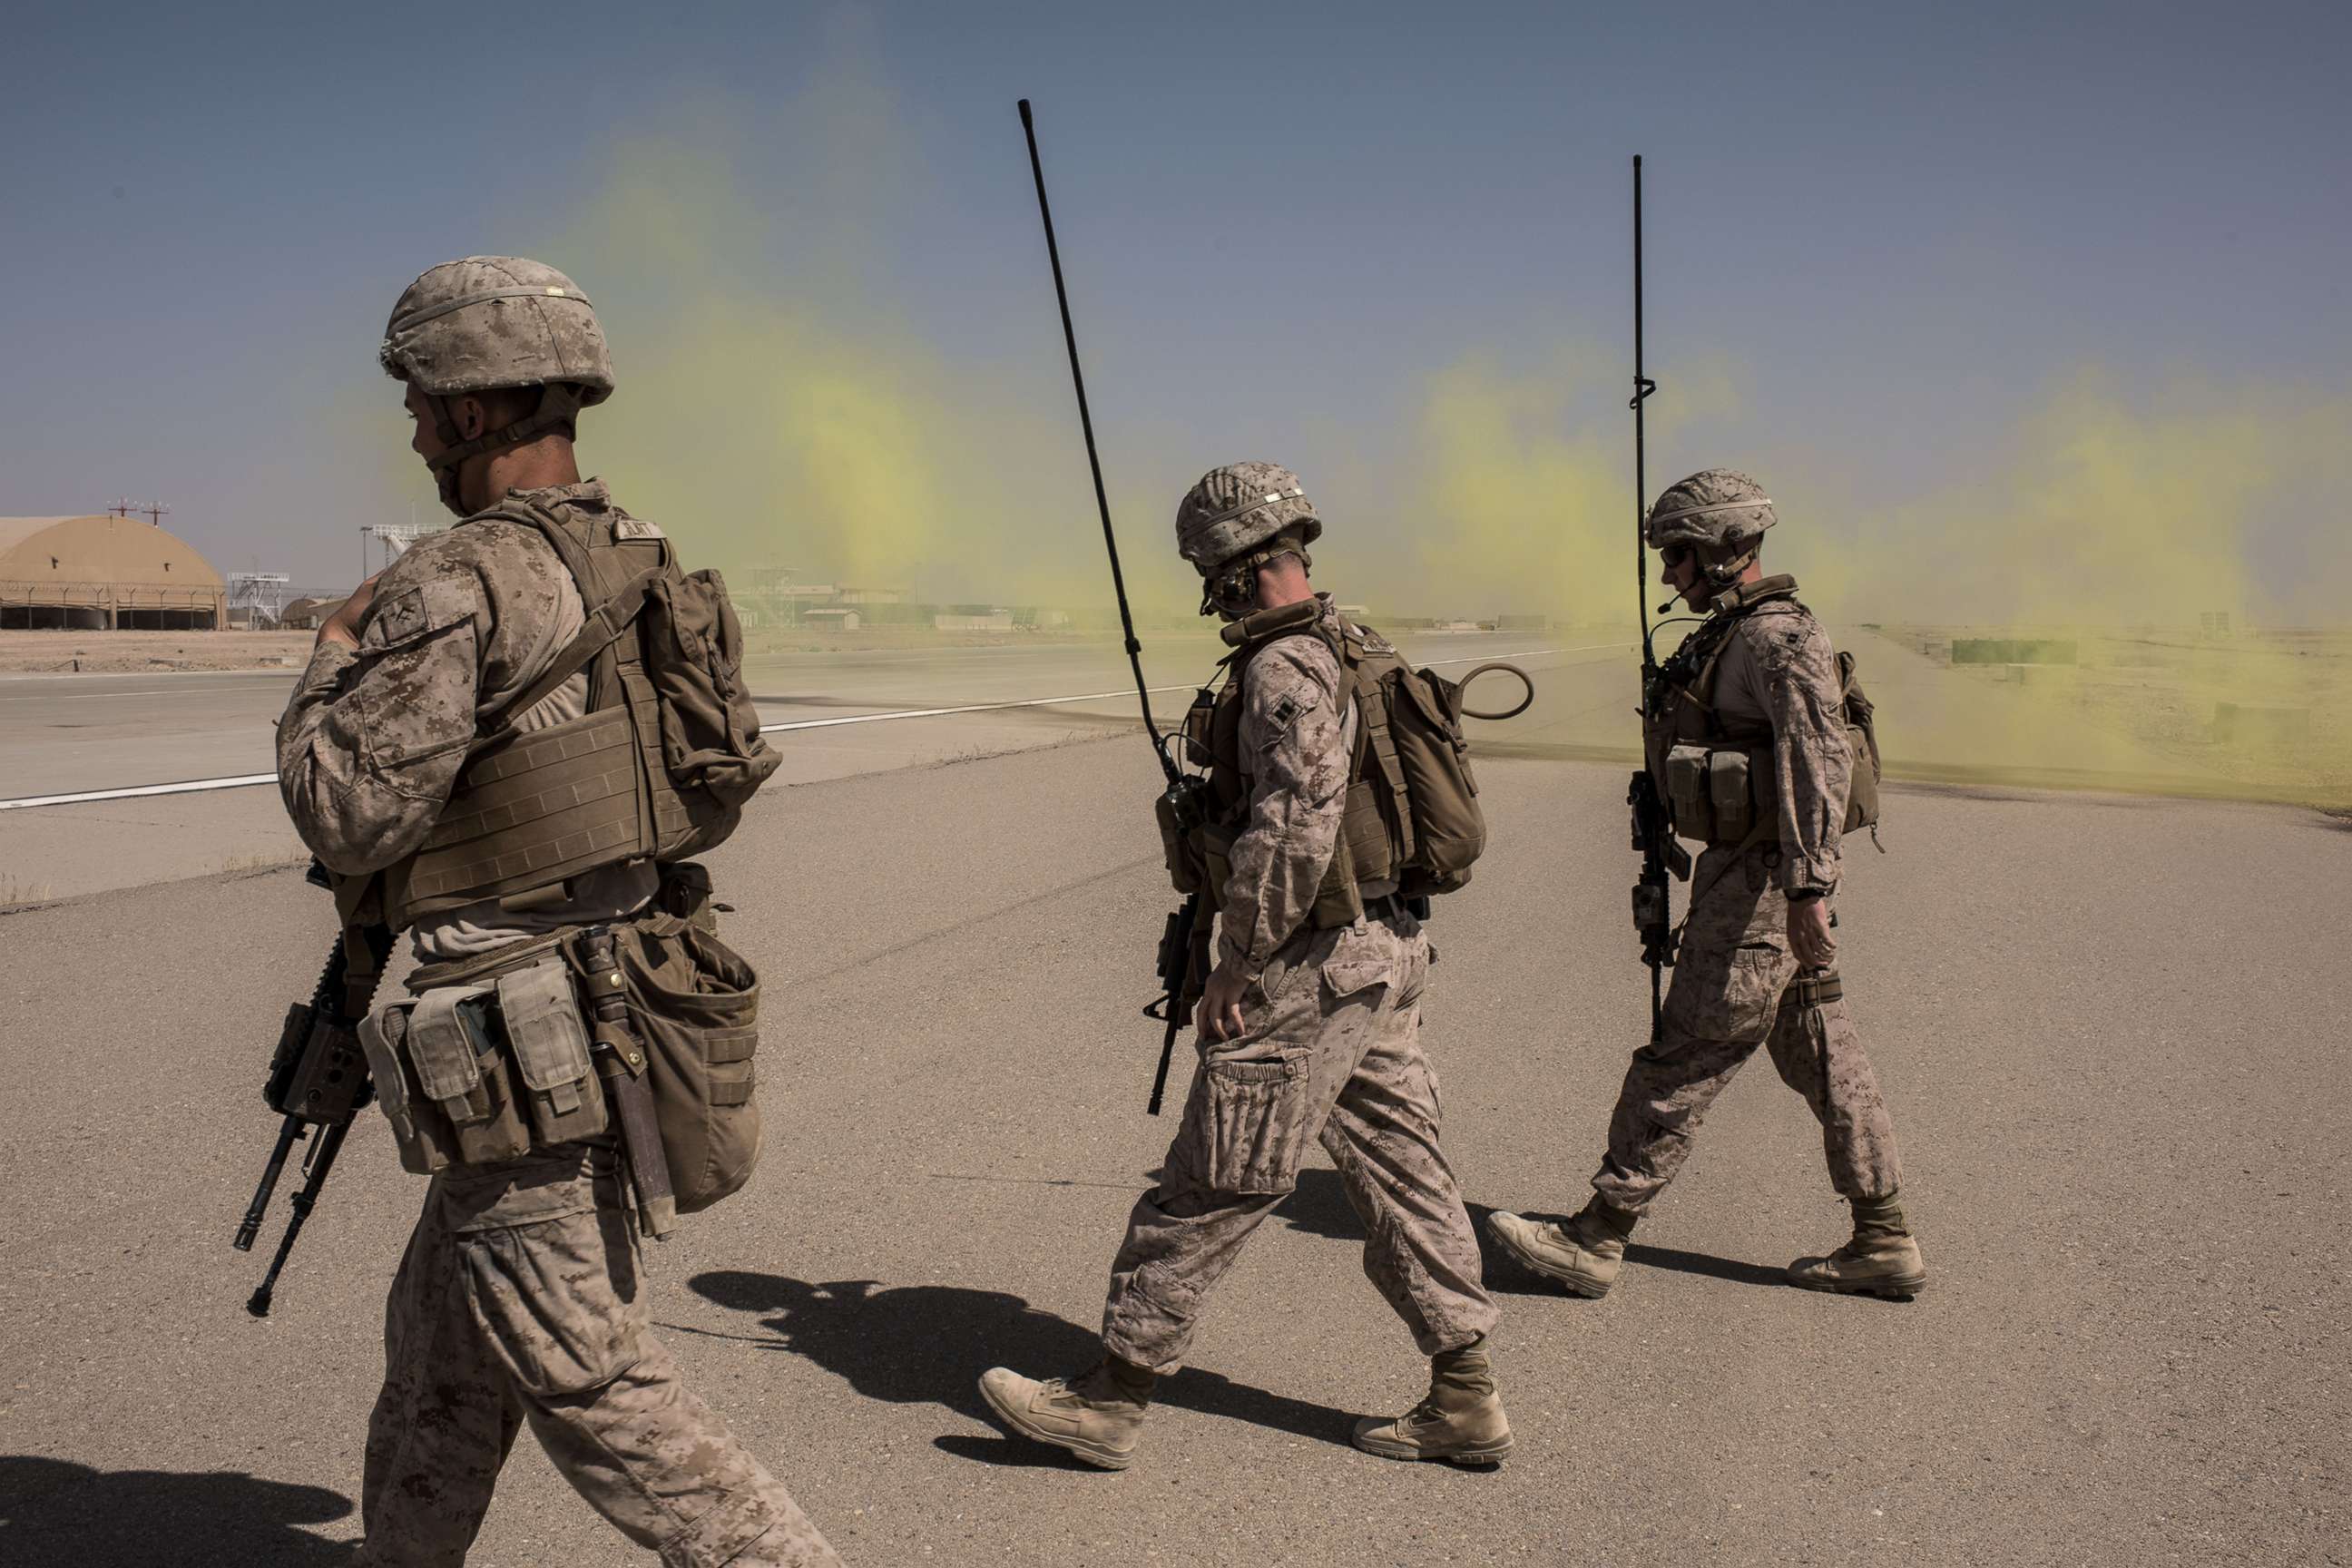 PHOTO: Members of the U.S. Marine Corp Task Force South West walk across a runway after marking a location for an airdrop of cargo on Sept. 10, 2017 at Camp Shorab in Helmand Province, Afghanistan.